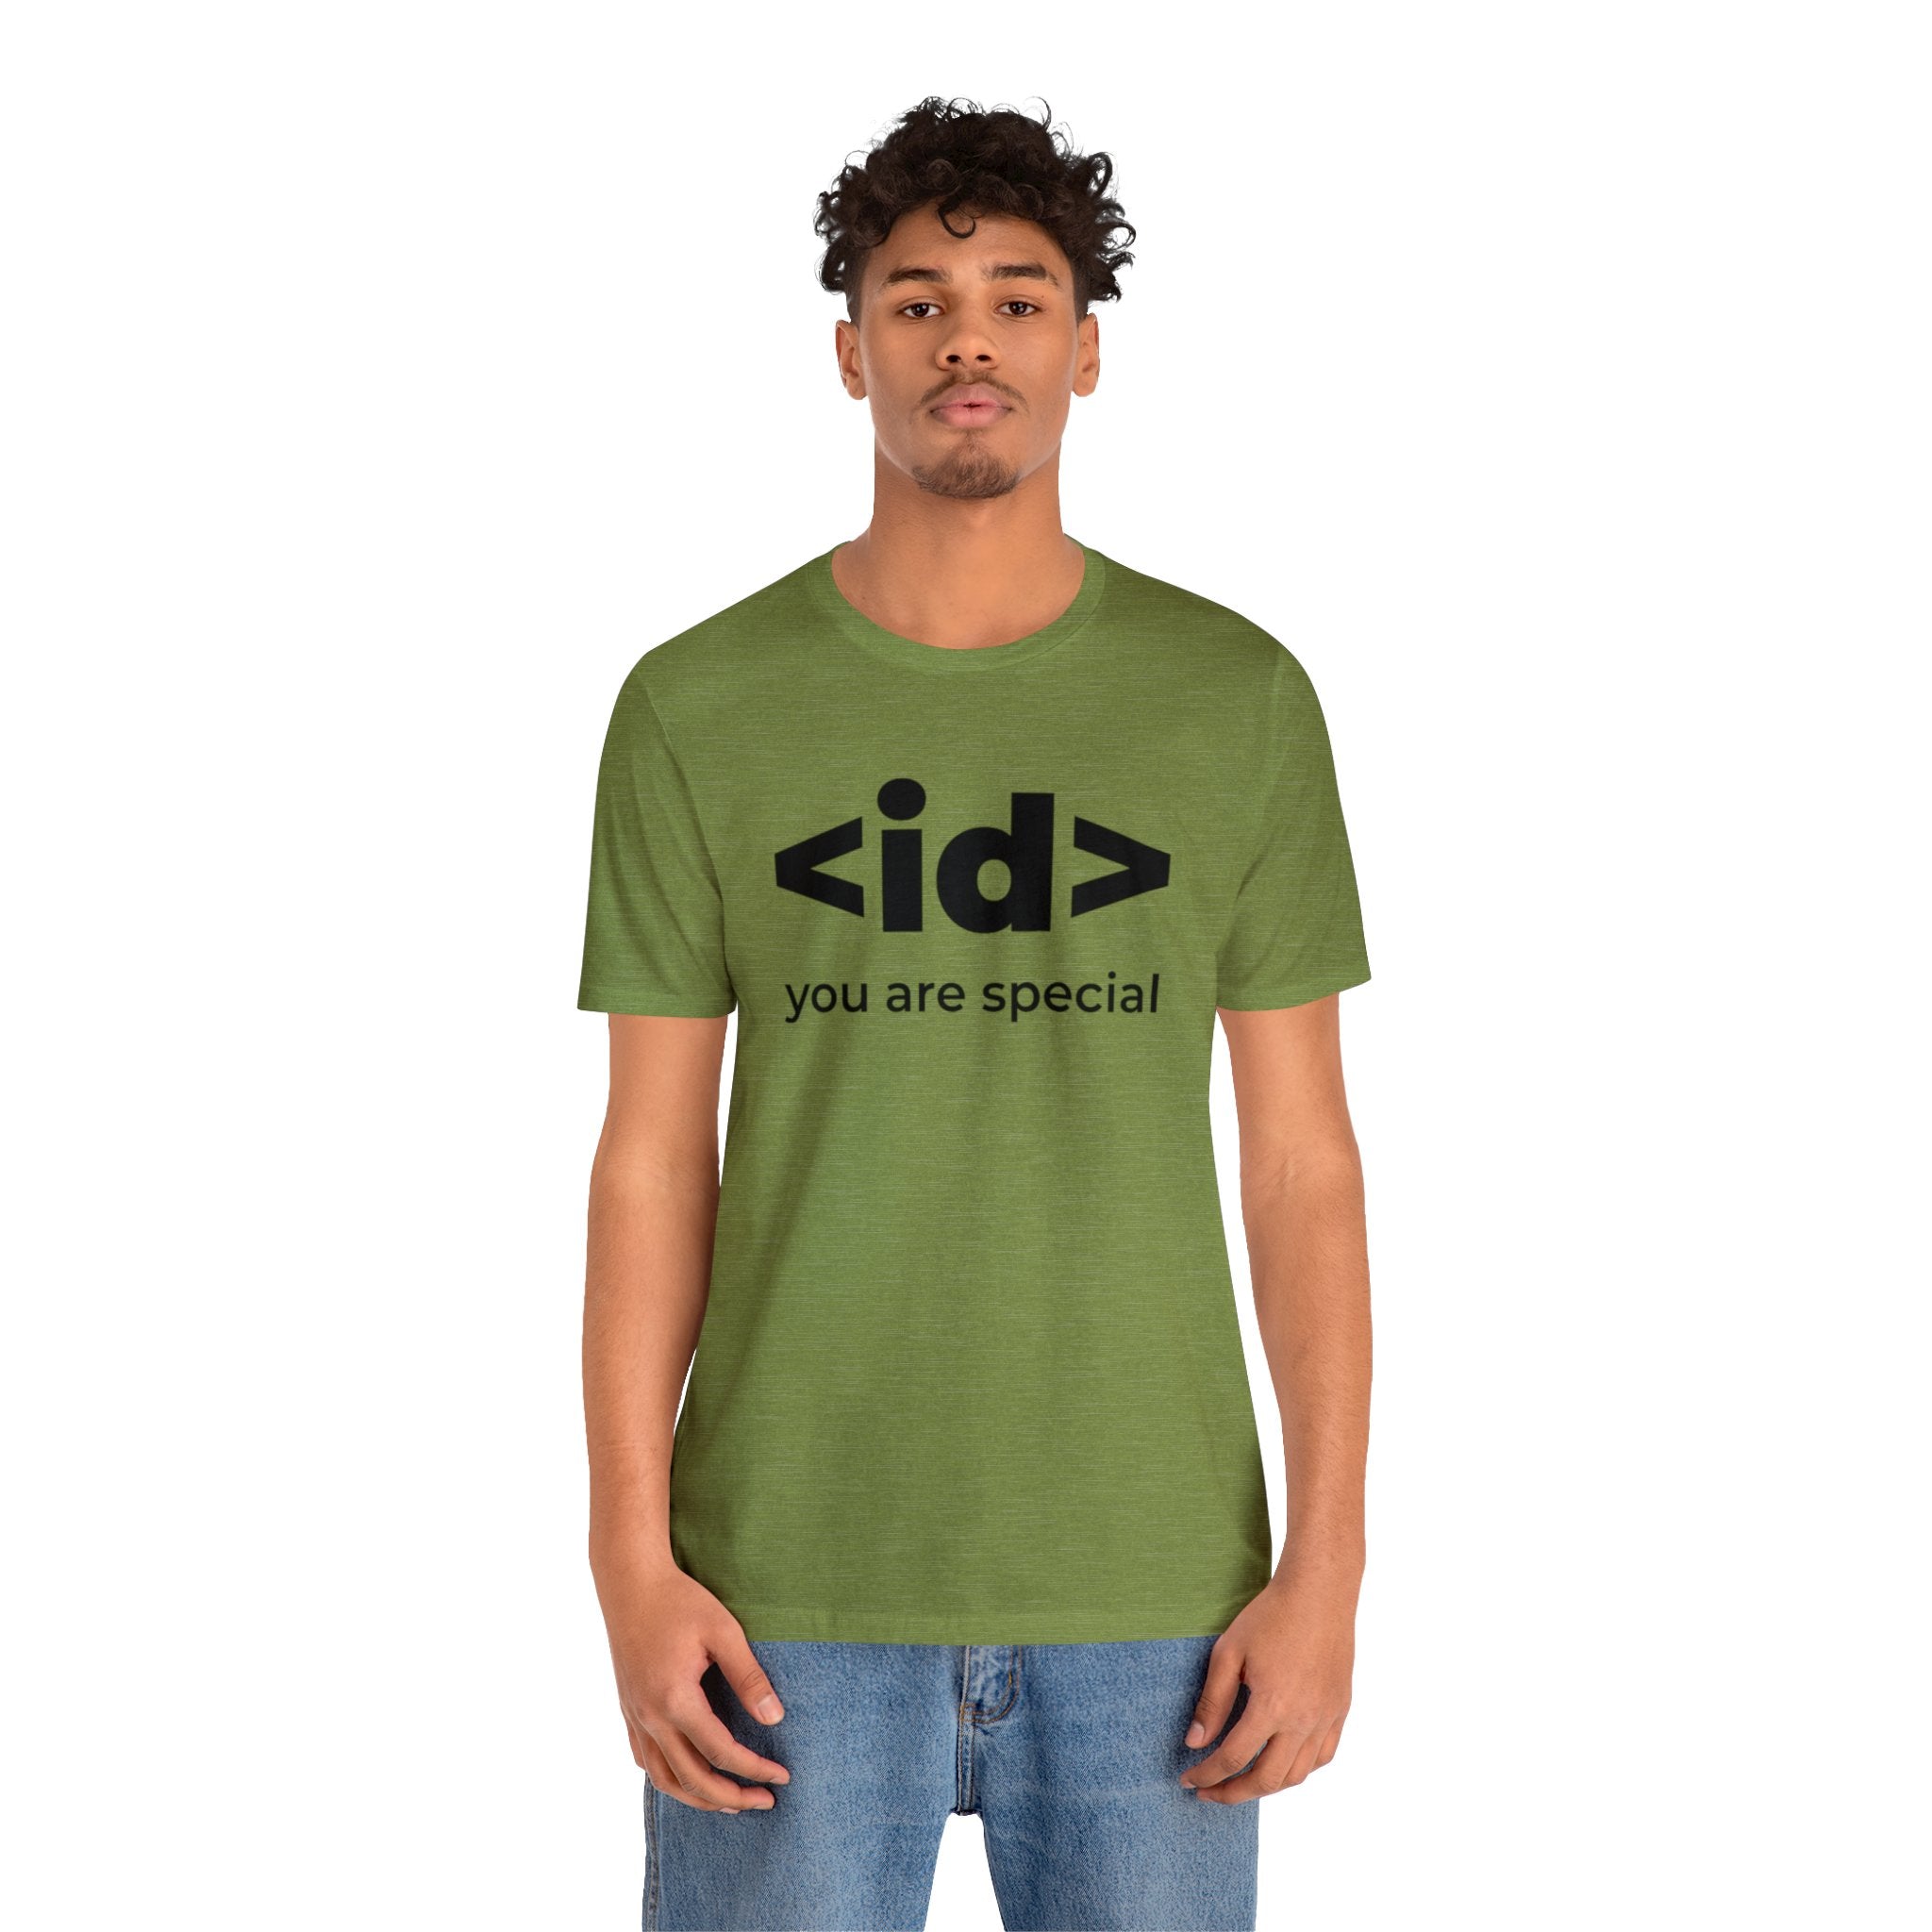 A man proudly wearing the <id> You Are Special T-shirt, showcasing his brilliance.